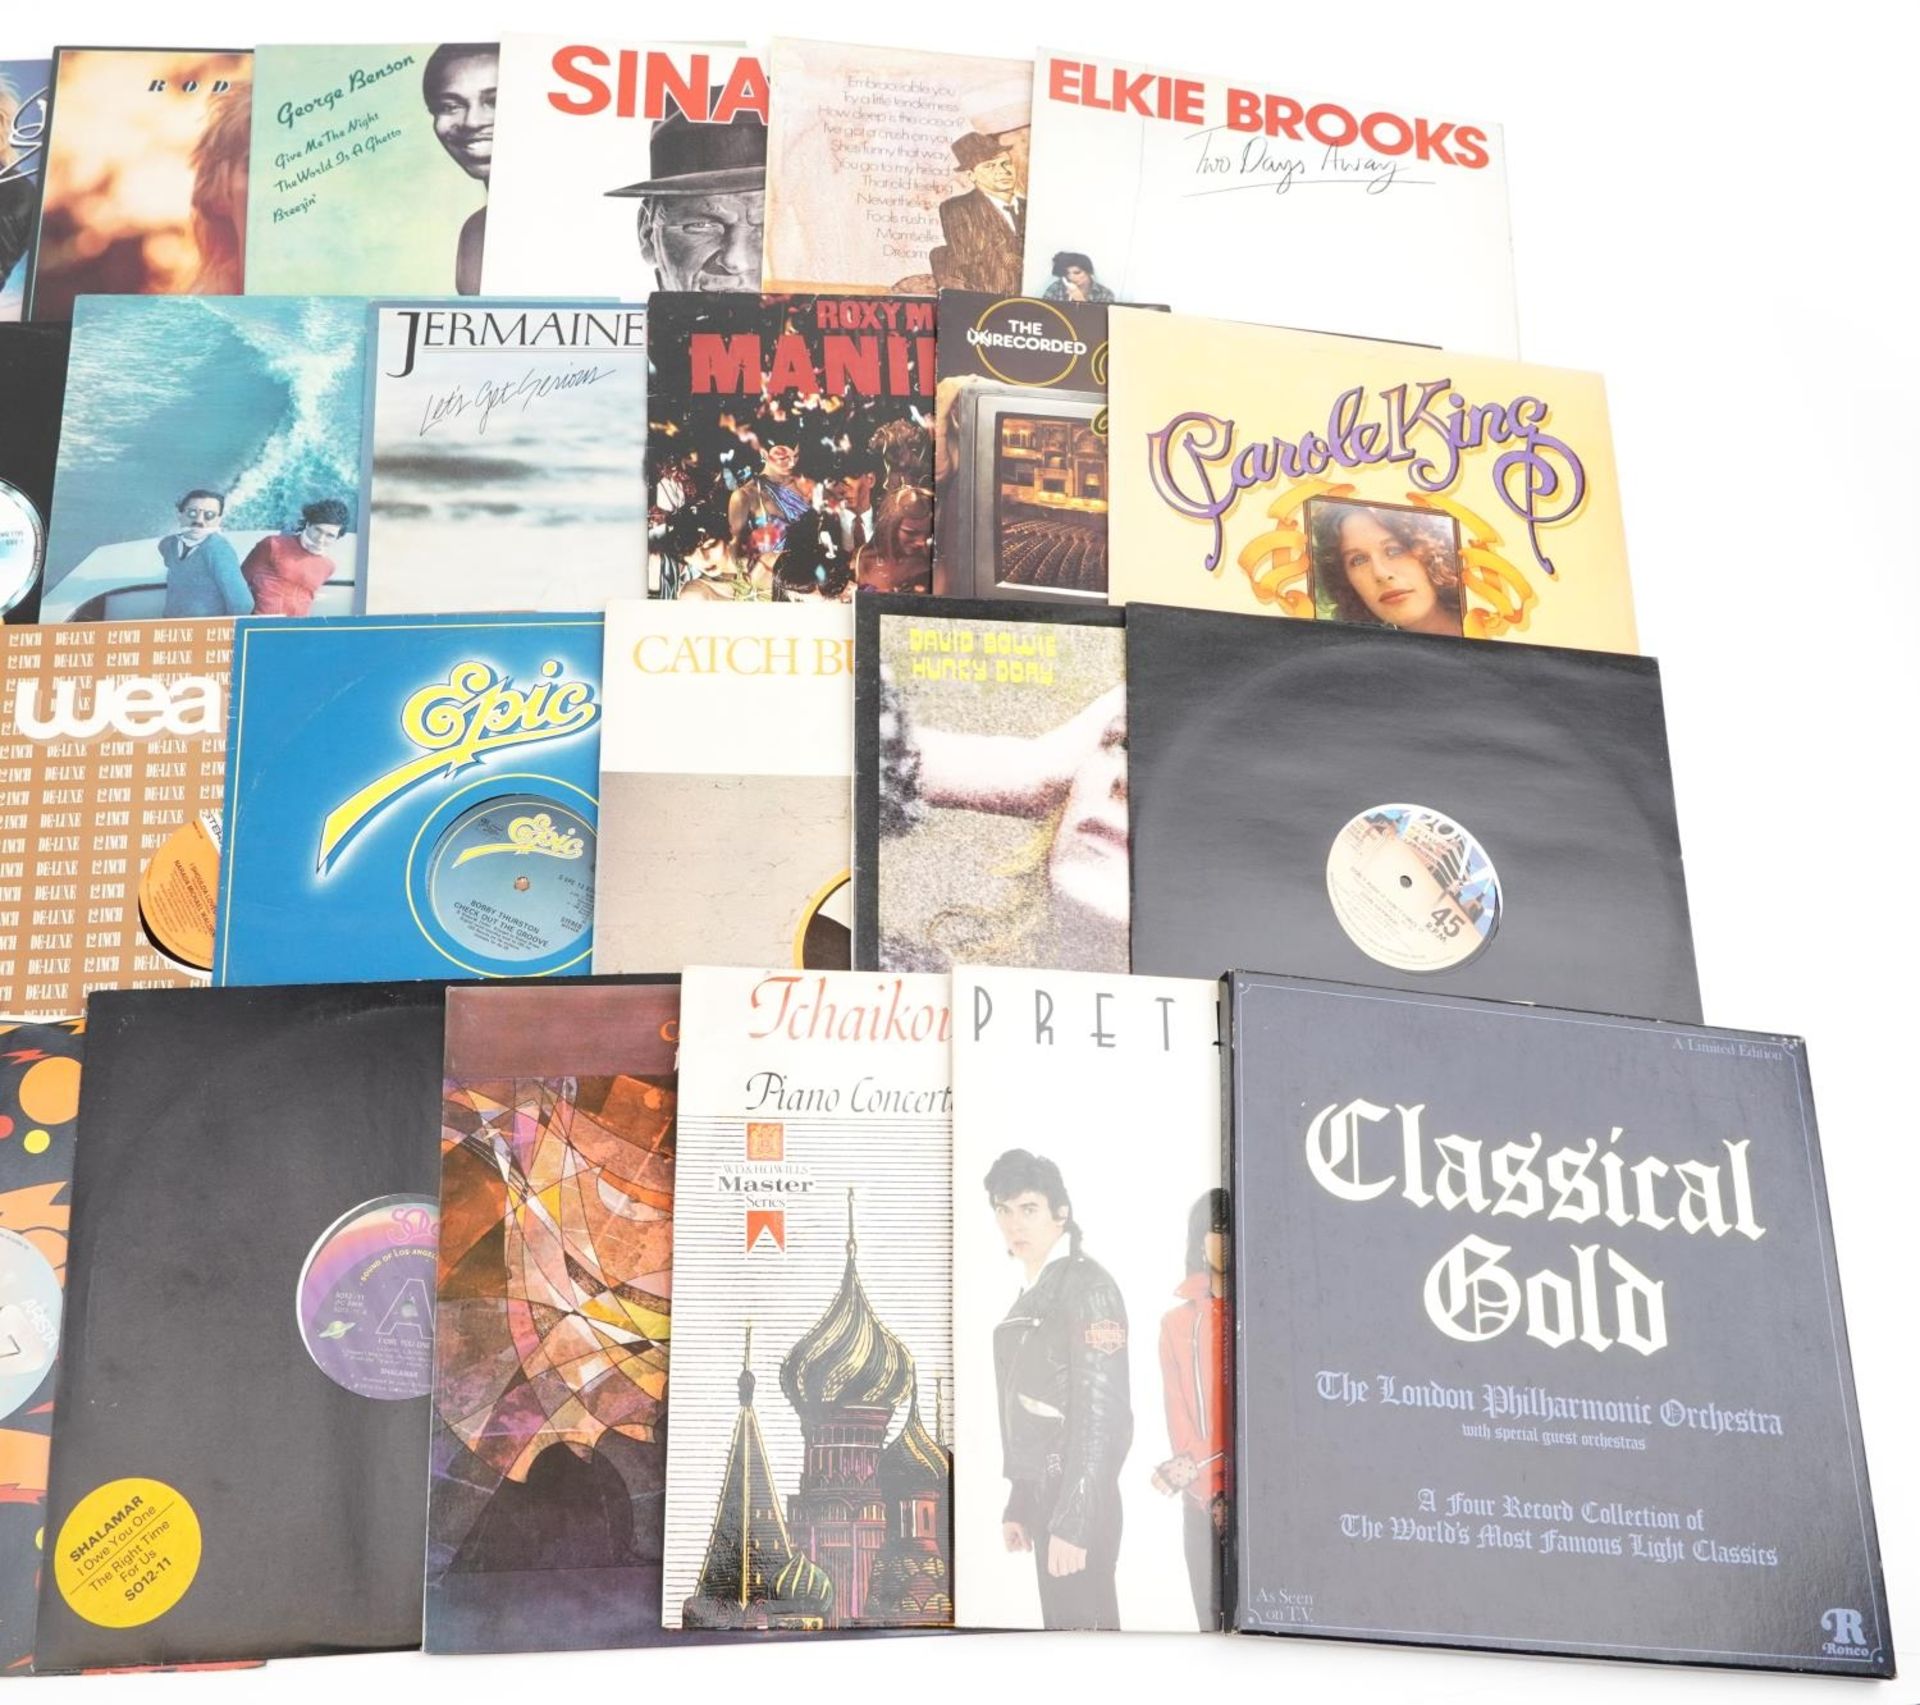 Vinyl LP records including Frank Sinatra, Rod Stewart, David Bowie, Electric Light Orchestra and The - Image 4 of 4